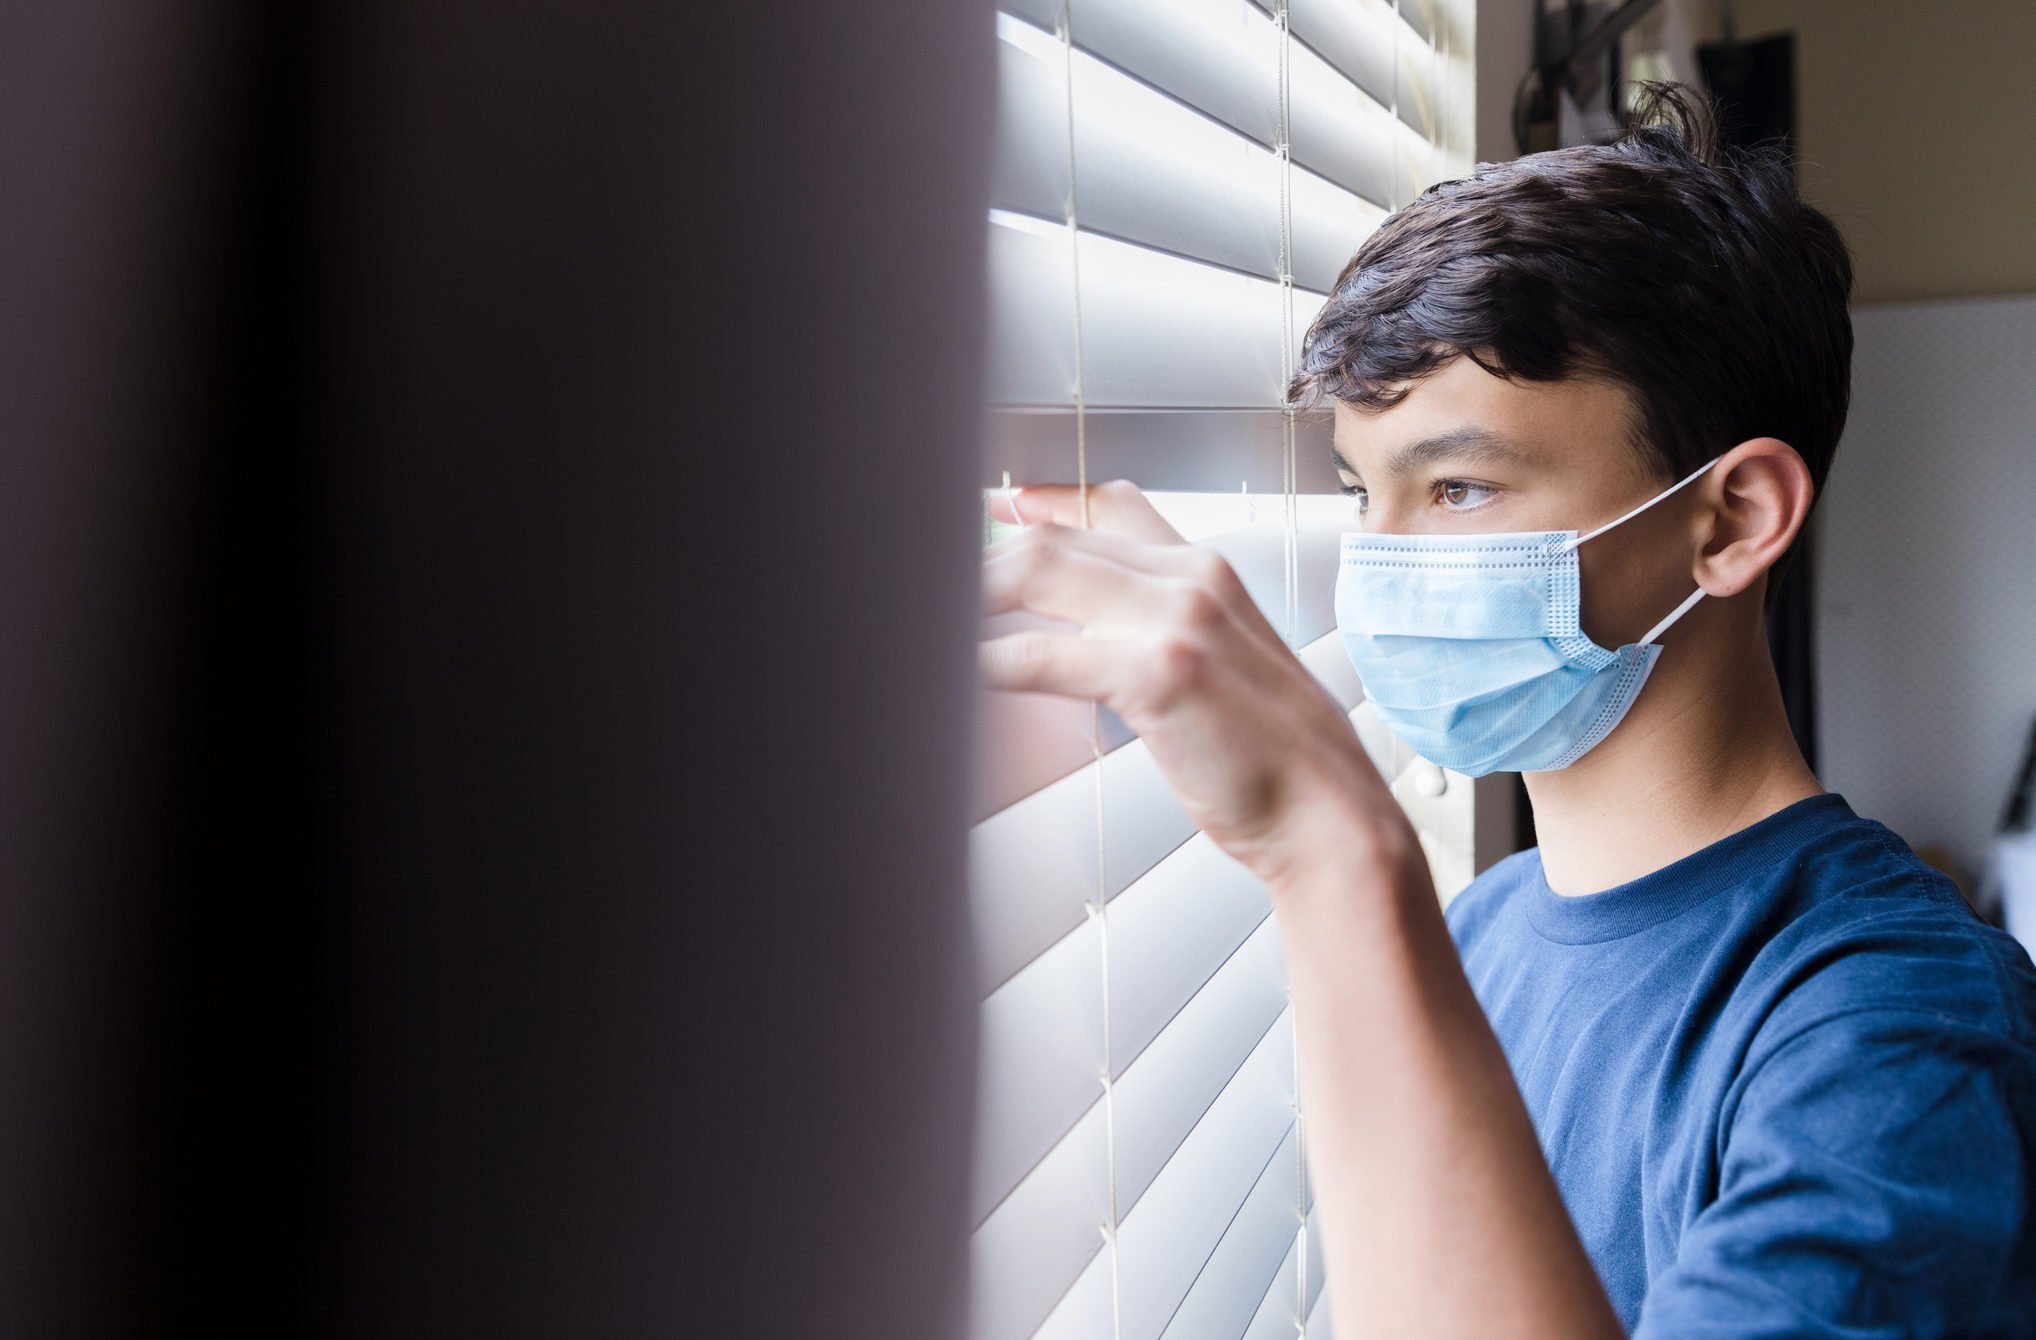 During COVID-19, quarantined boy wearing mask looks through blinds